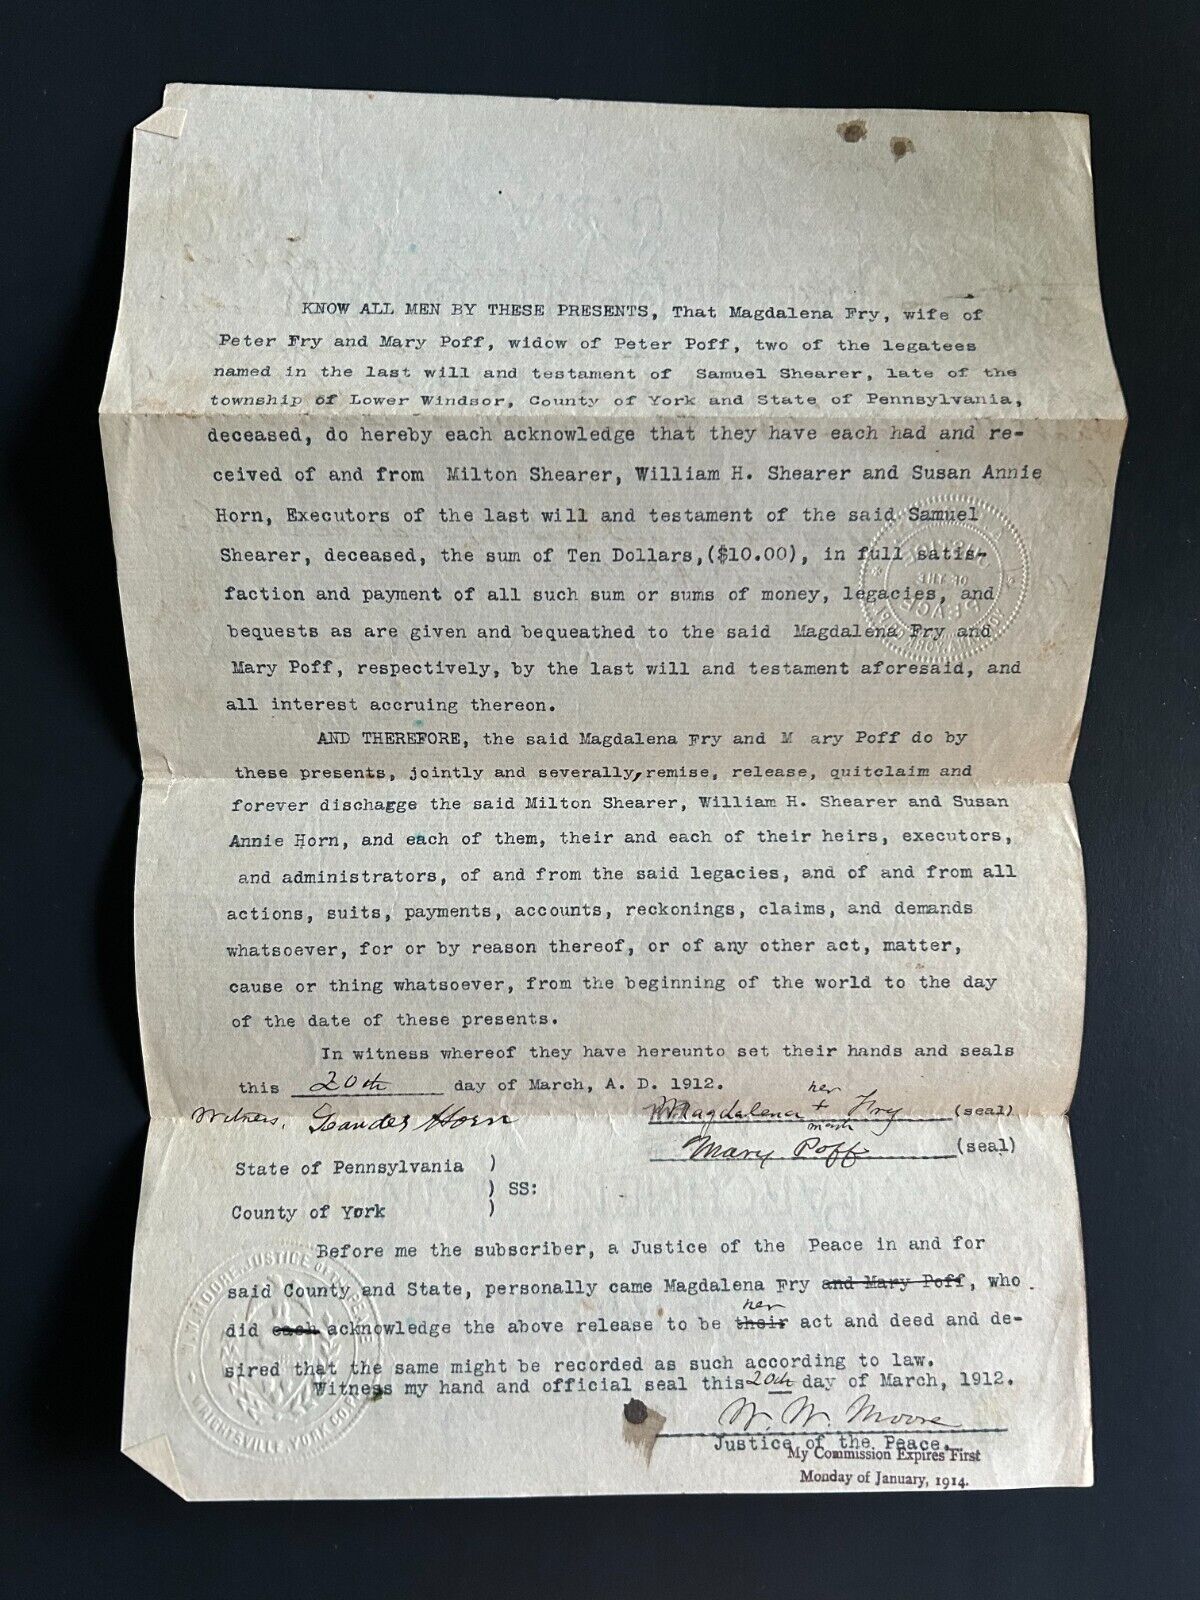 Last Will and Testament From York, Pennsylvania: March 20th, 1912